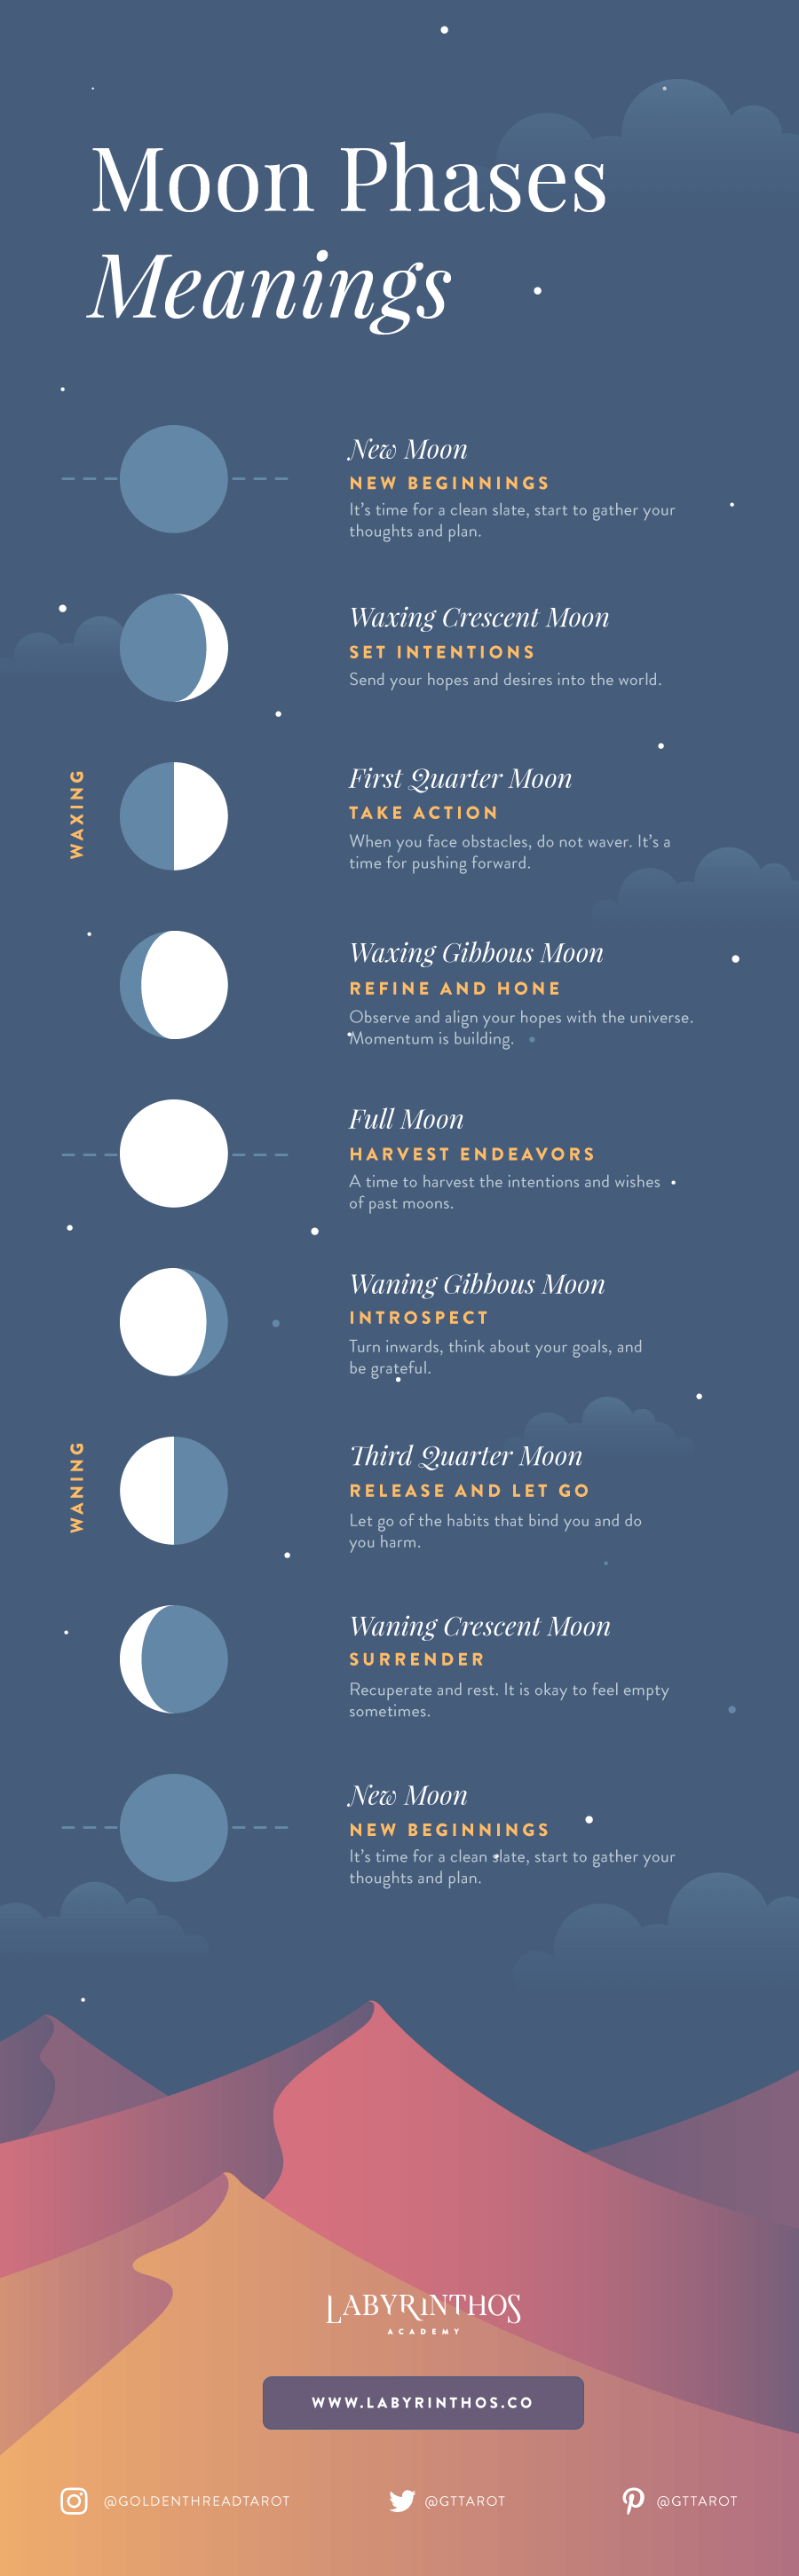 Moon Phases and their Meanings Infographic